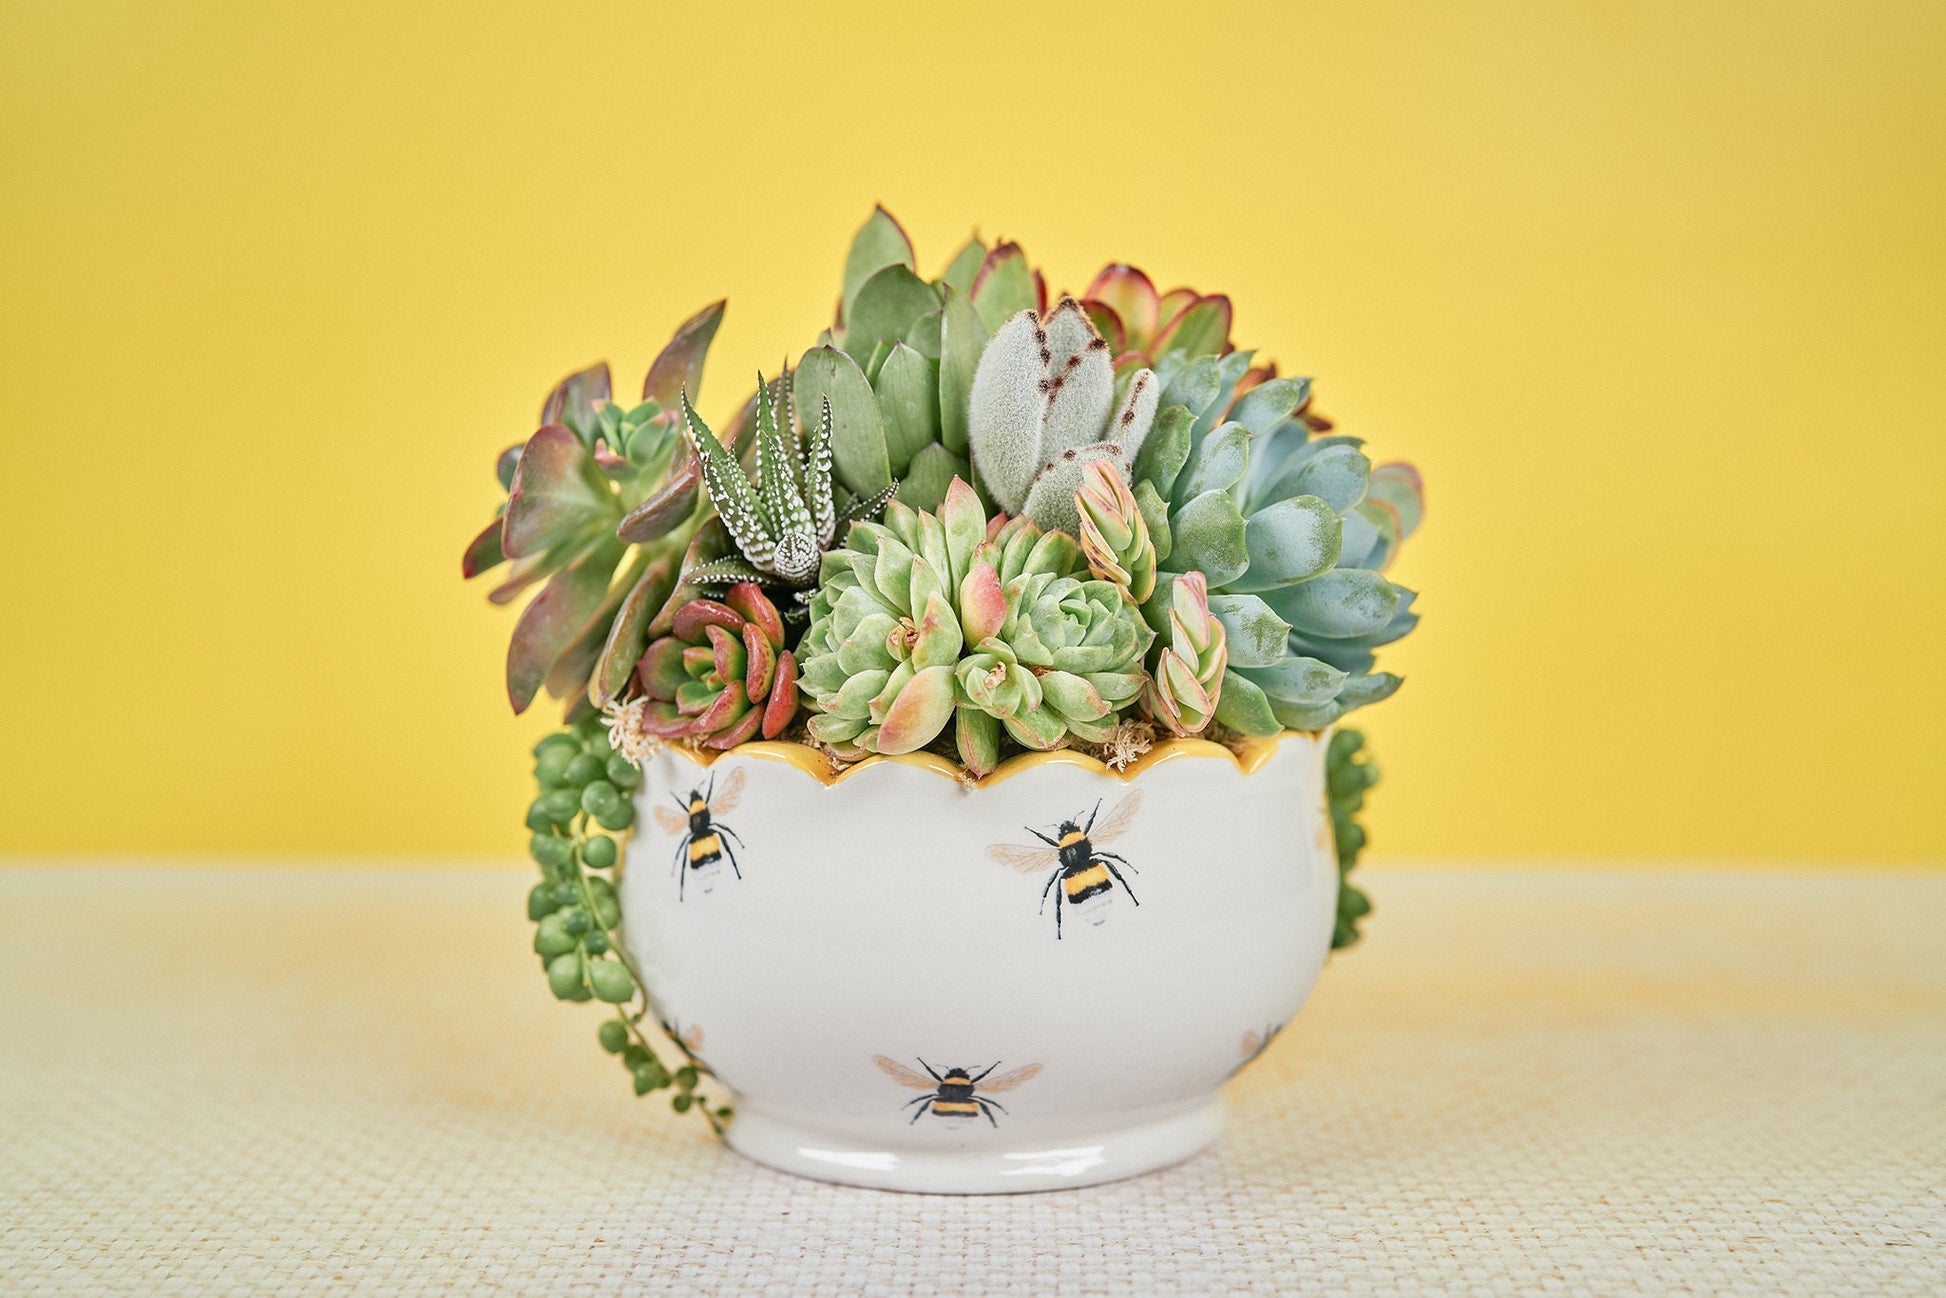 BumbleBee Living Succulent Arrangement Gift | Birthday, Celebration, Sympathy, House Warming Living Gift for Plant Lovers